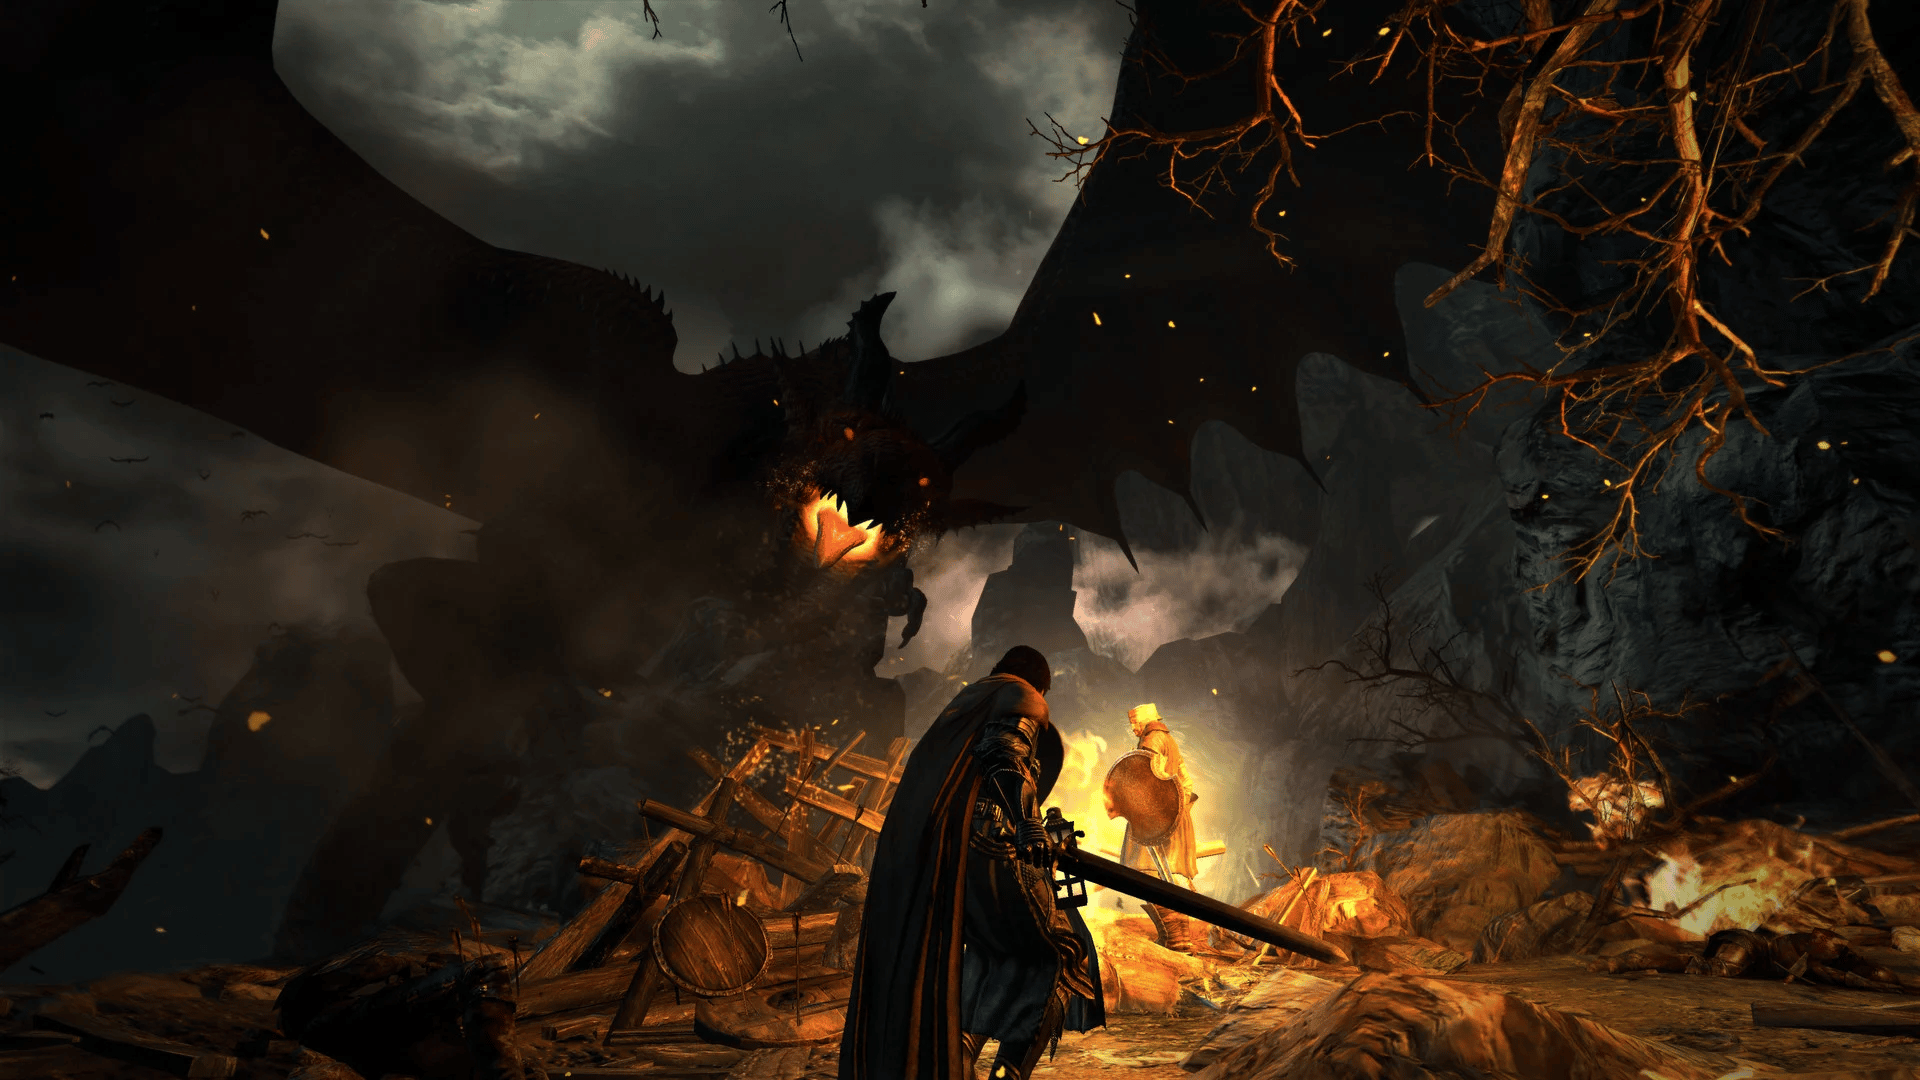 10 Years of Dragon’s Dogma Digital Event Announced For This Week